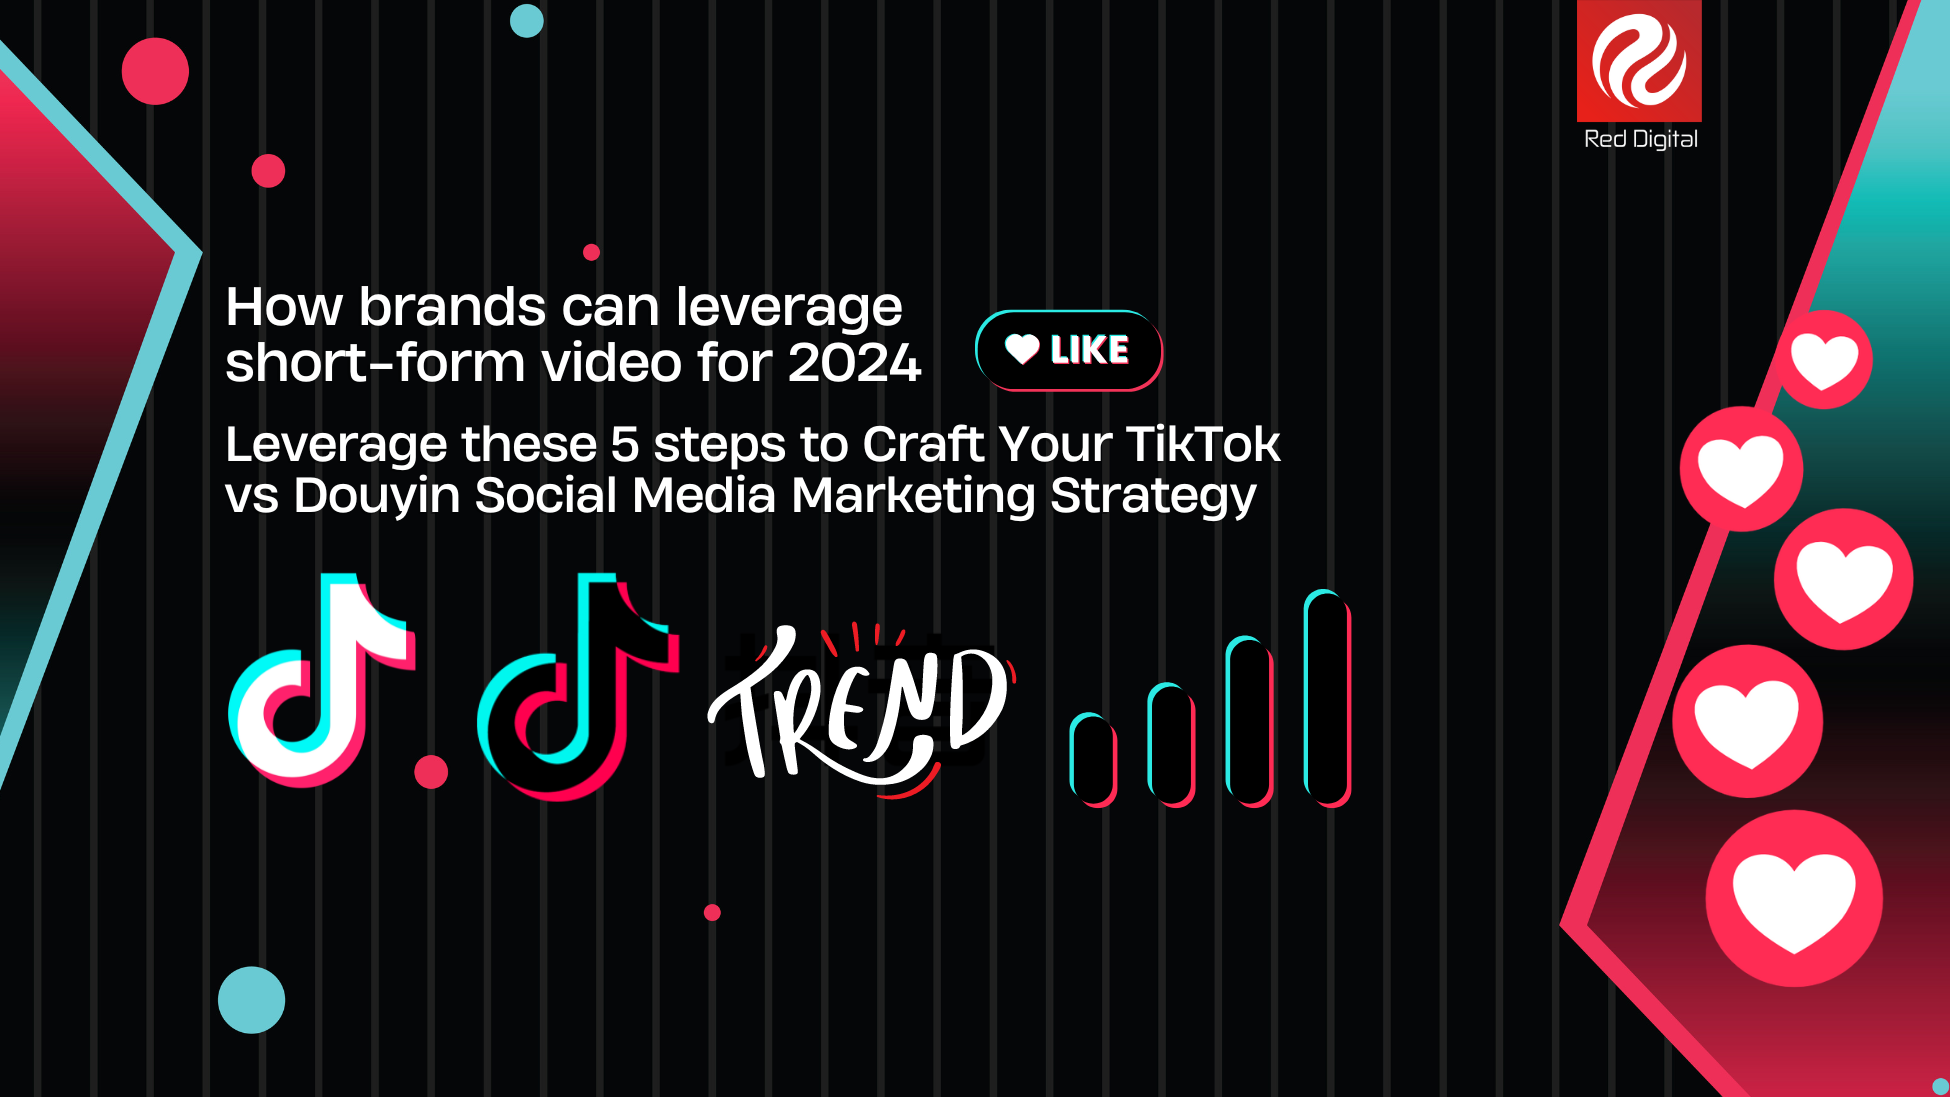 How brands can leverage short-form video for 2024: Crafting Your TikTok vs Douyin Social Media Marketing Strategy hero image